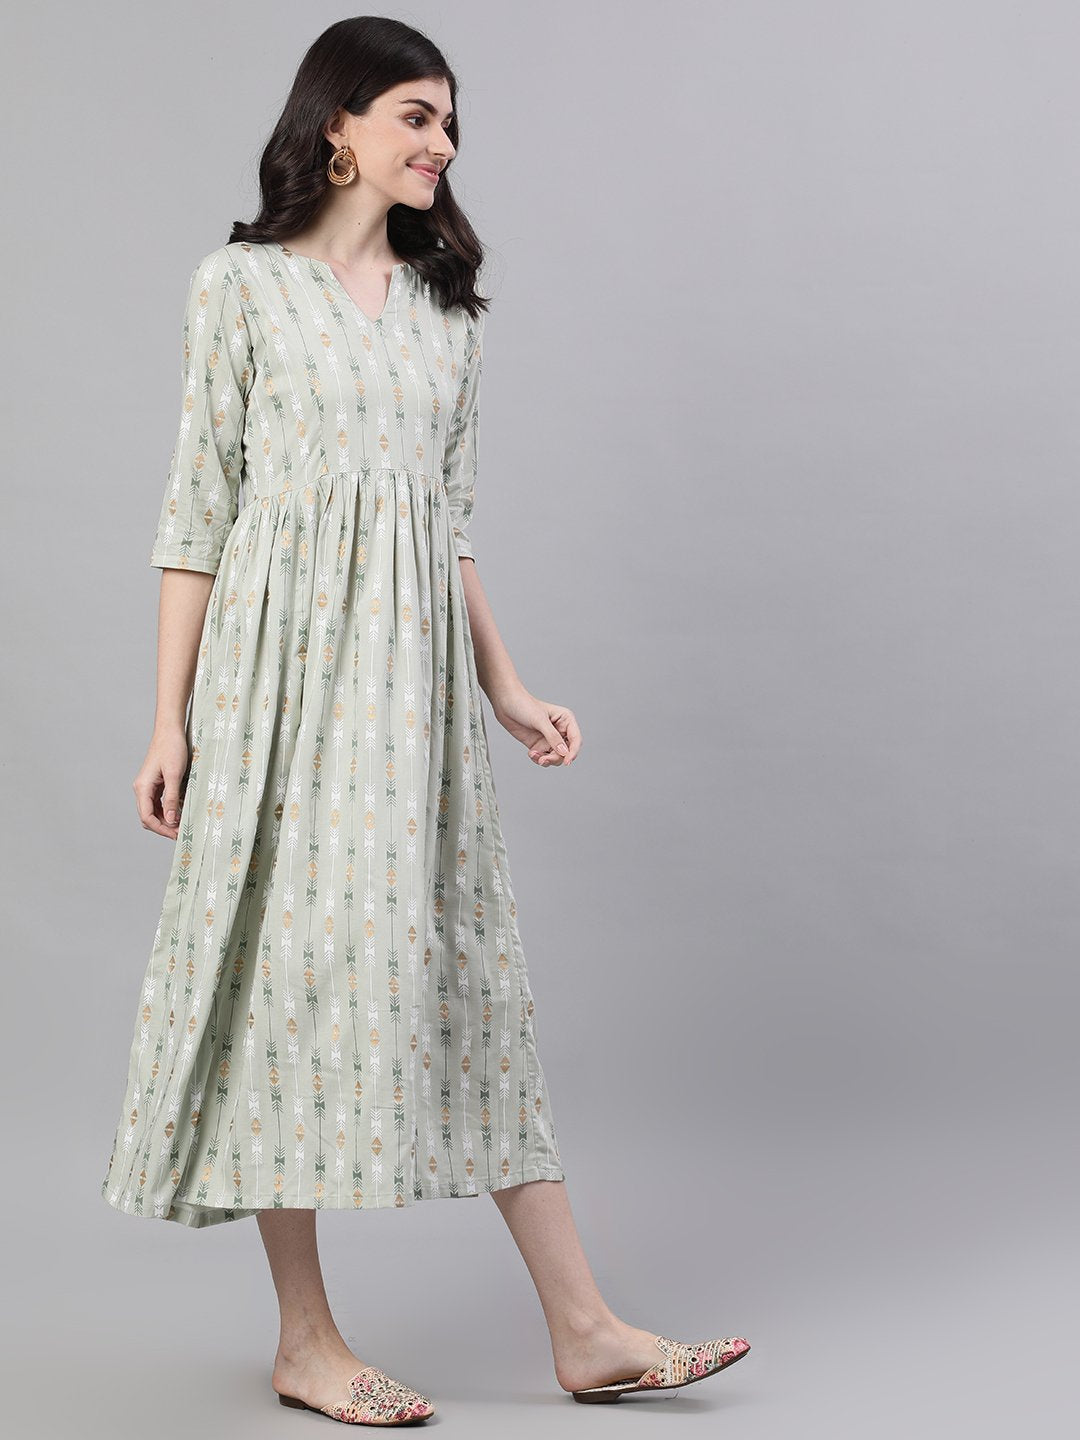 Women's Sage Green Geometric Printed V-Neck Viscose Rayon Fit And Flare Dress - Nayo Clothing